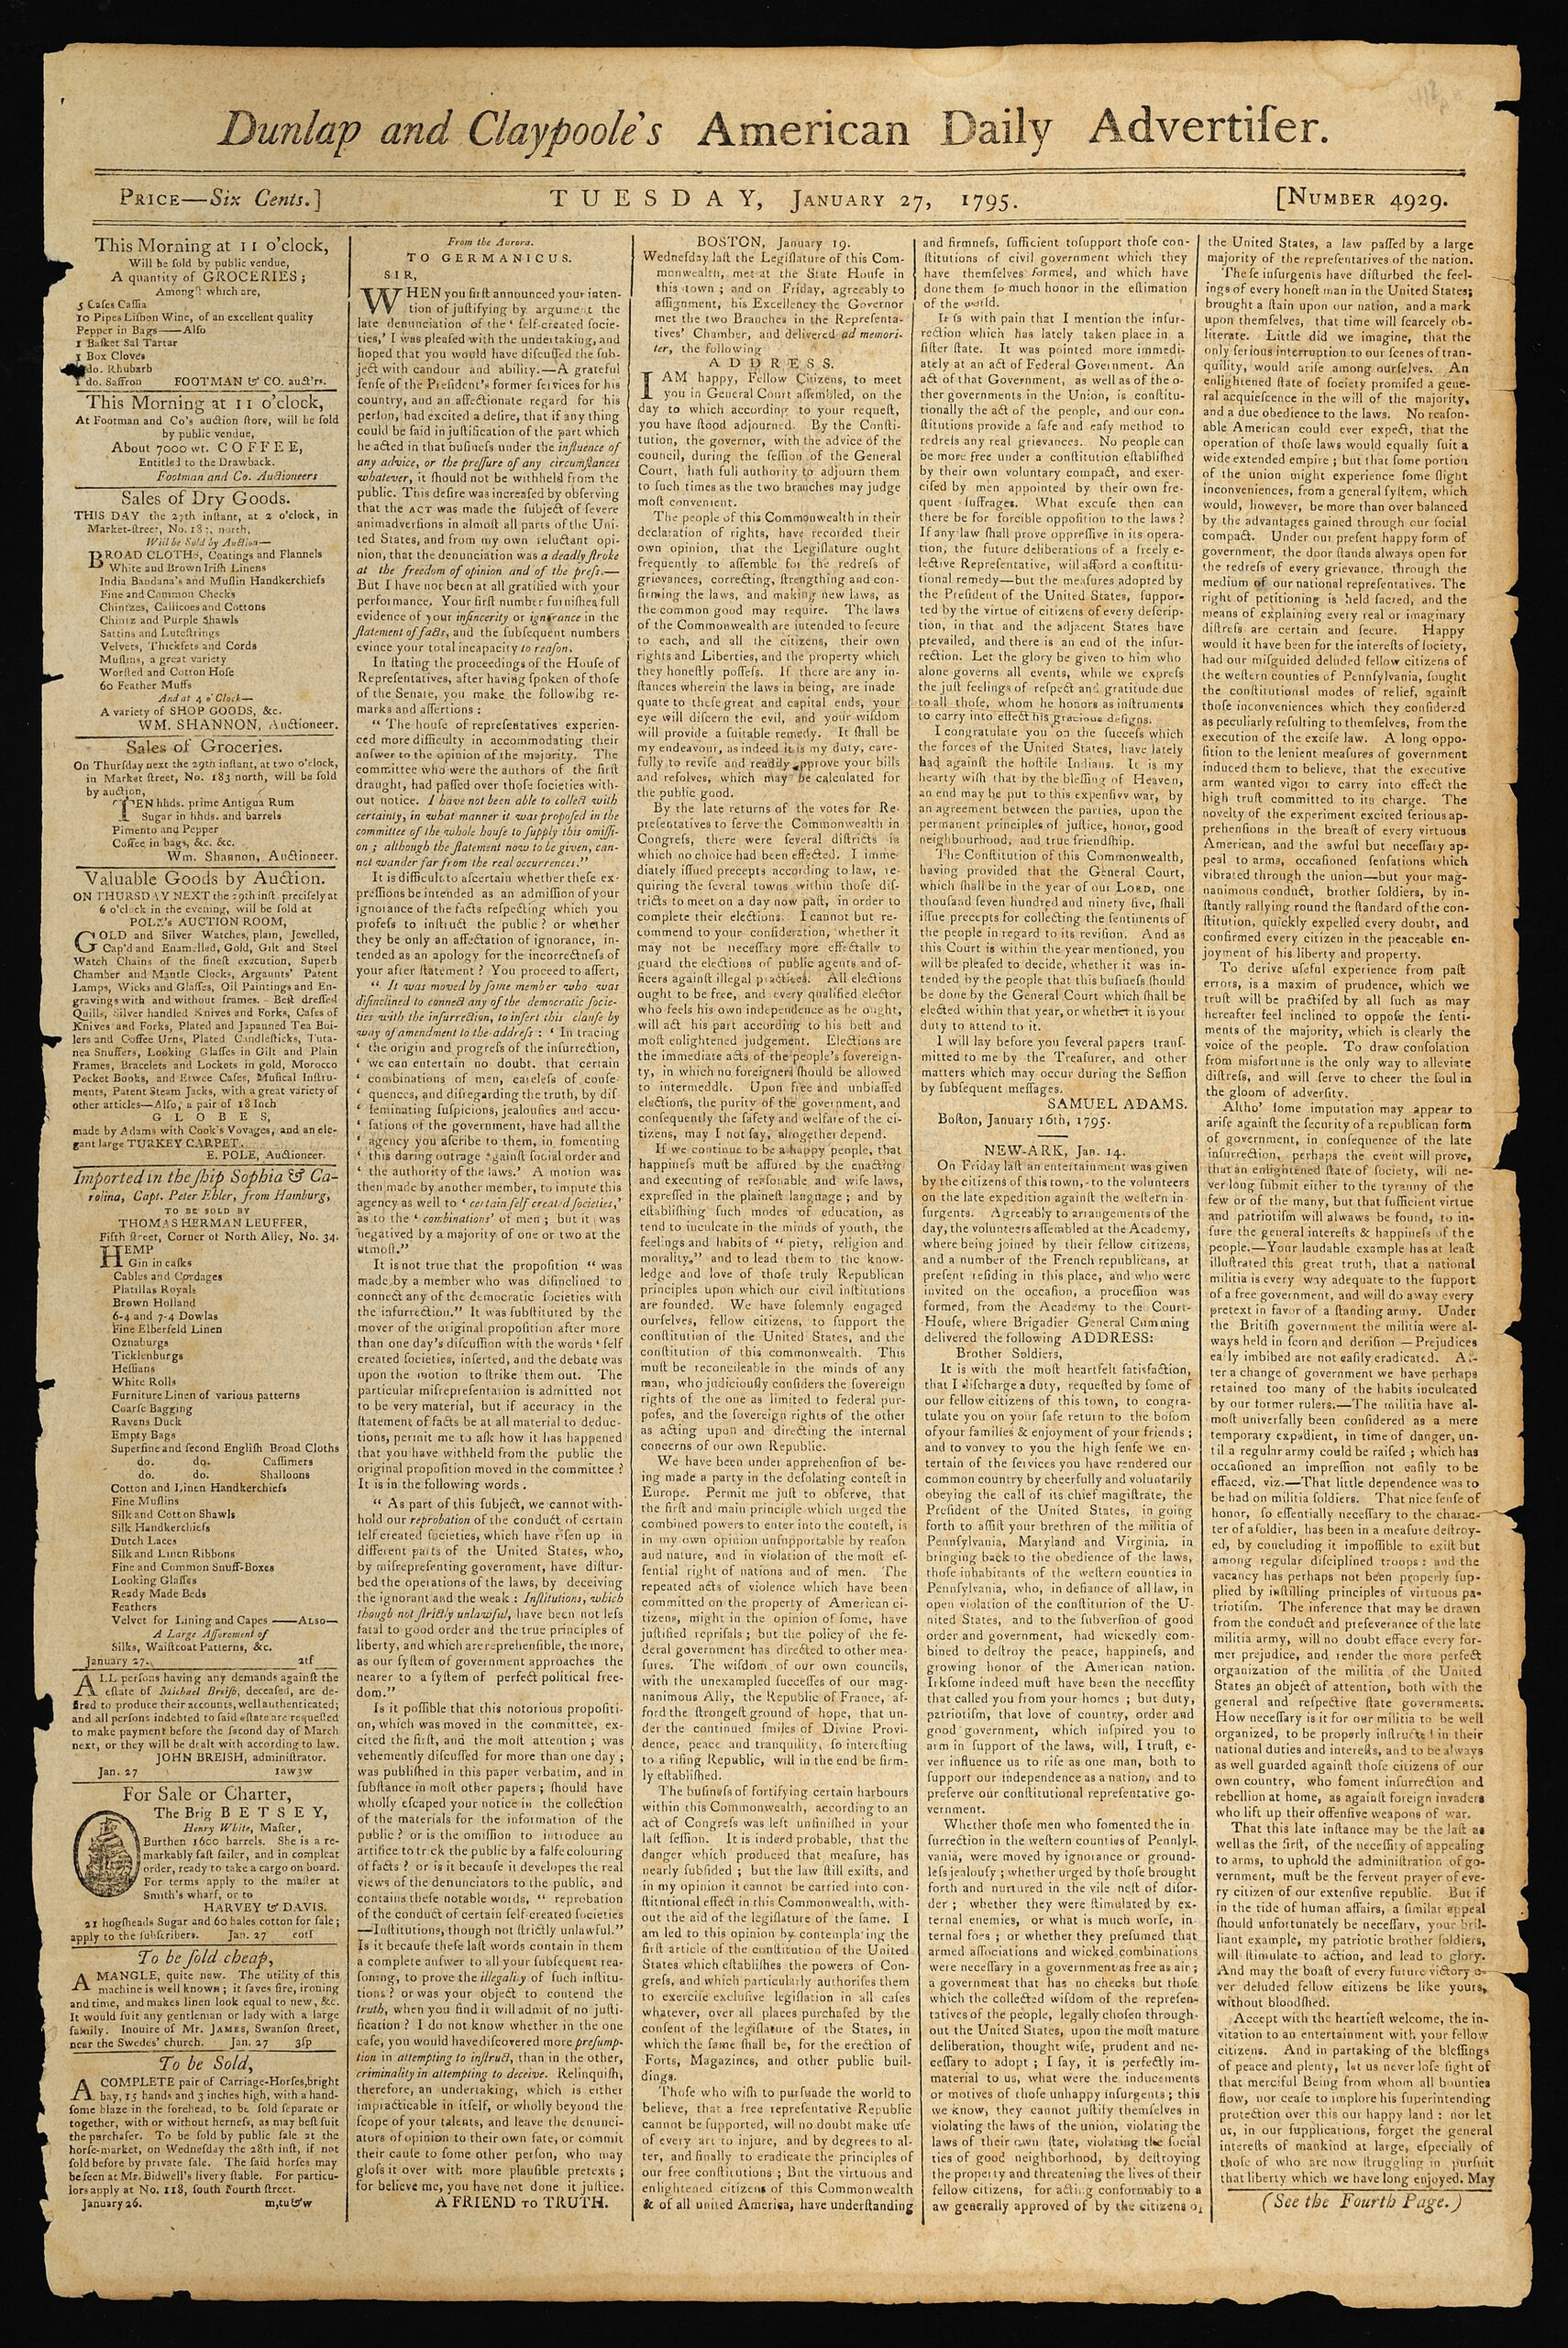 Newspapers - The American Revolution Institute